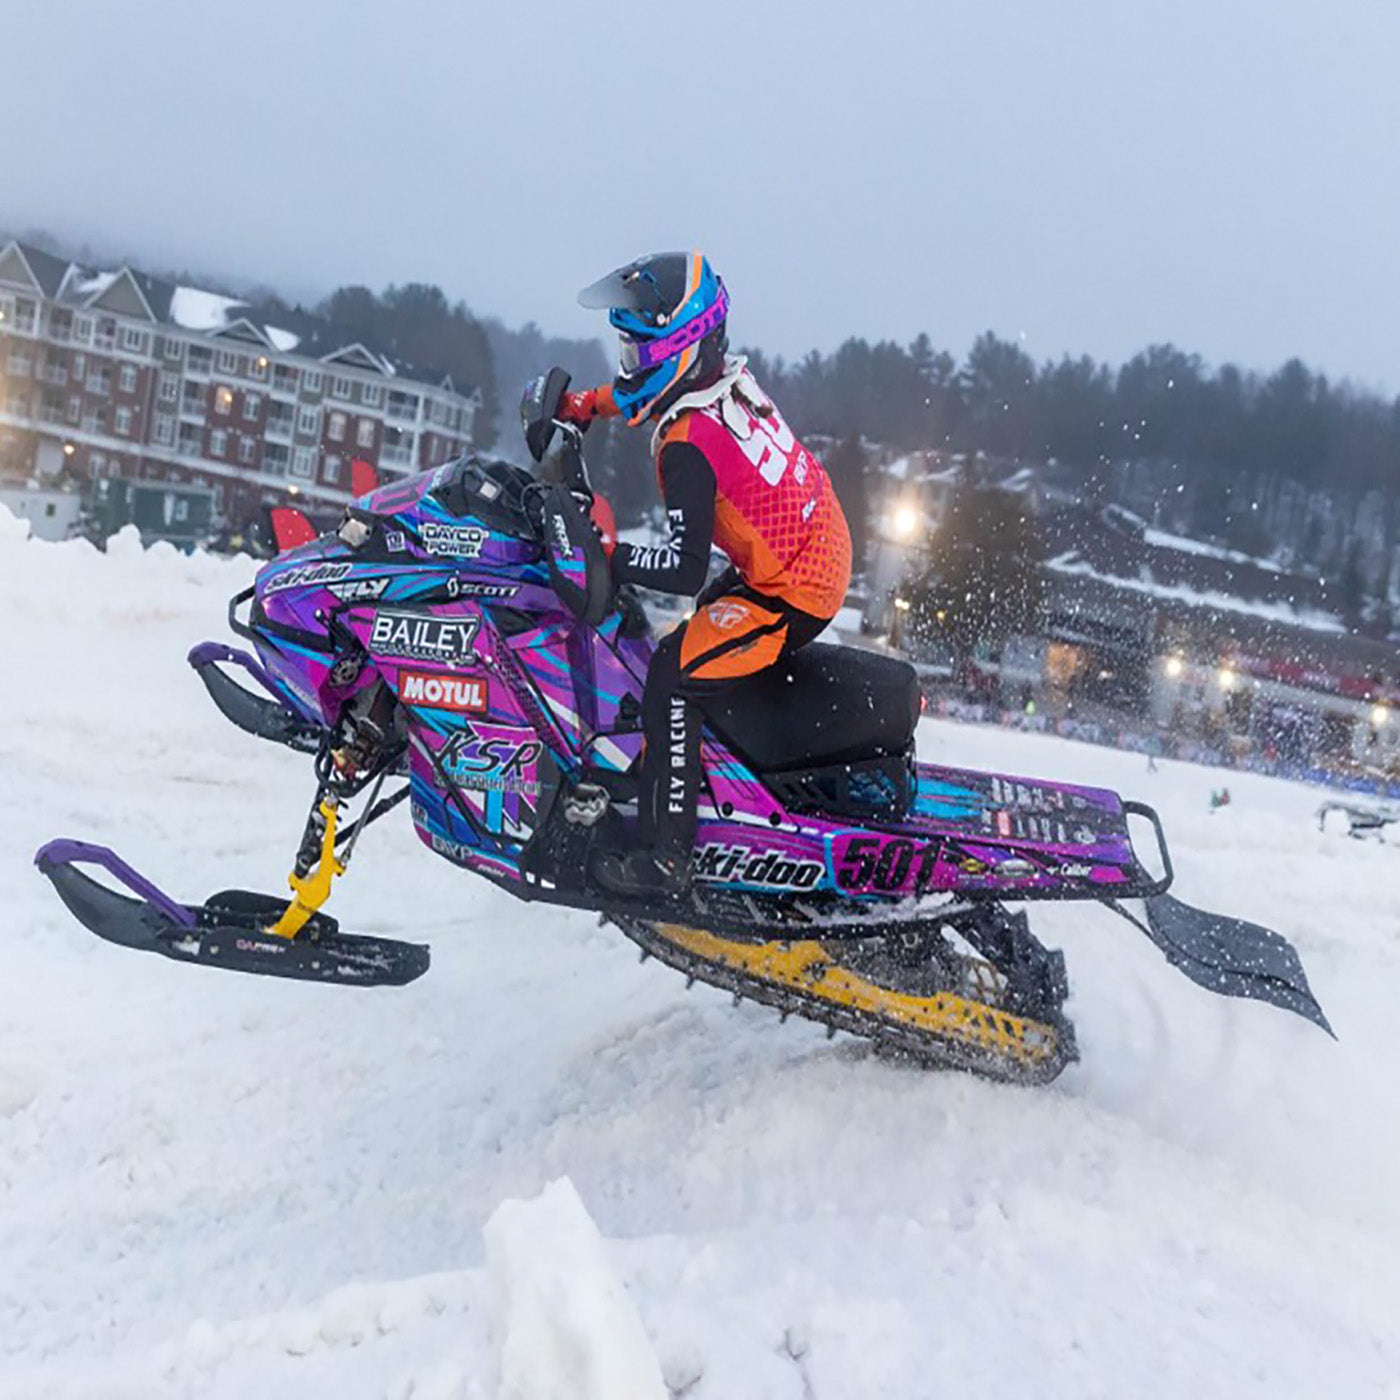 One of the Karkoulas sisters, Dakota, riding a snowmobile on black C&A Pro skis with purple handles. 